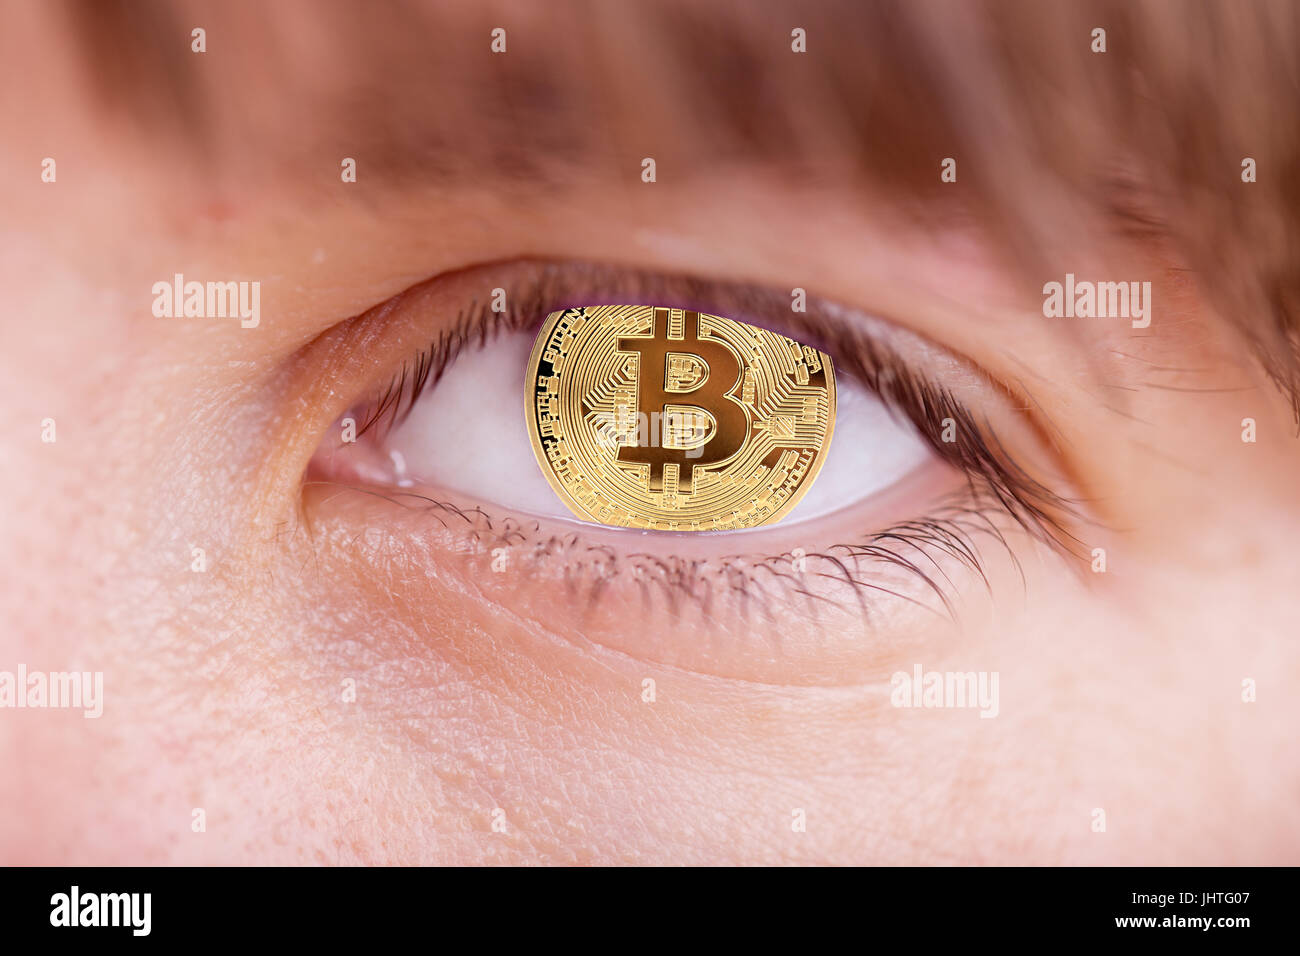 woman with gold bitcoim signs in she eye Stock Photo